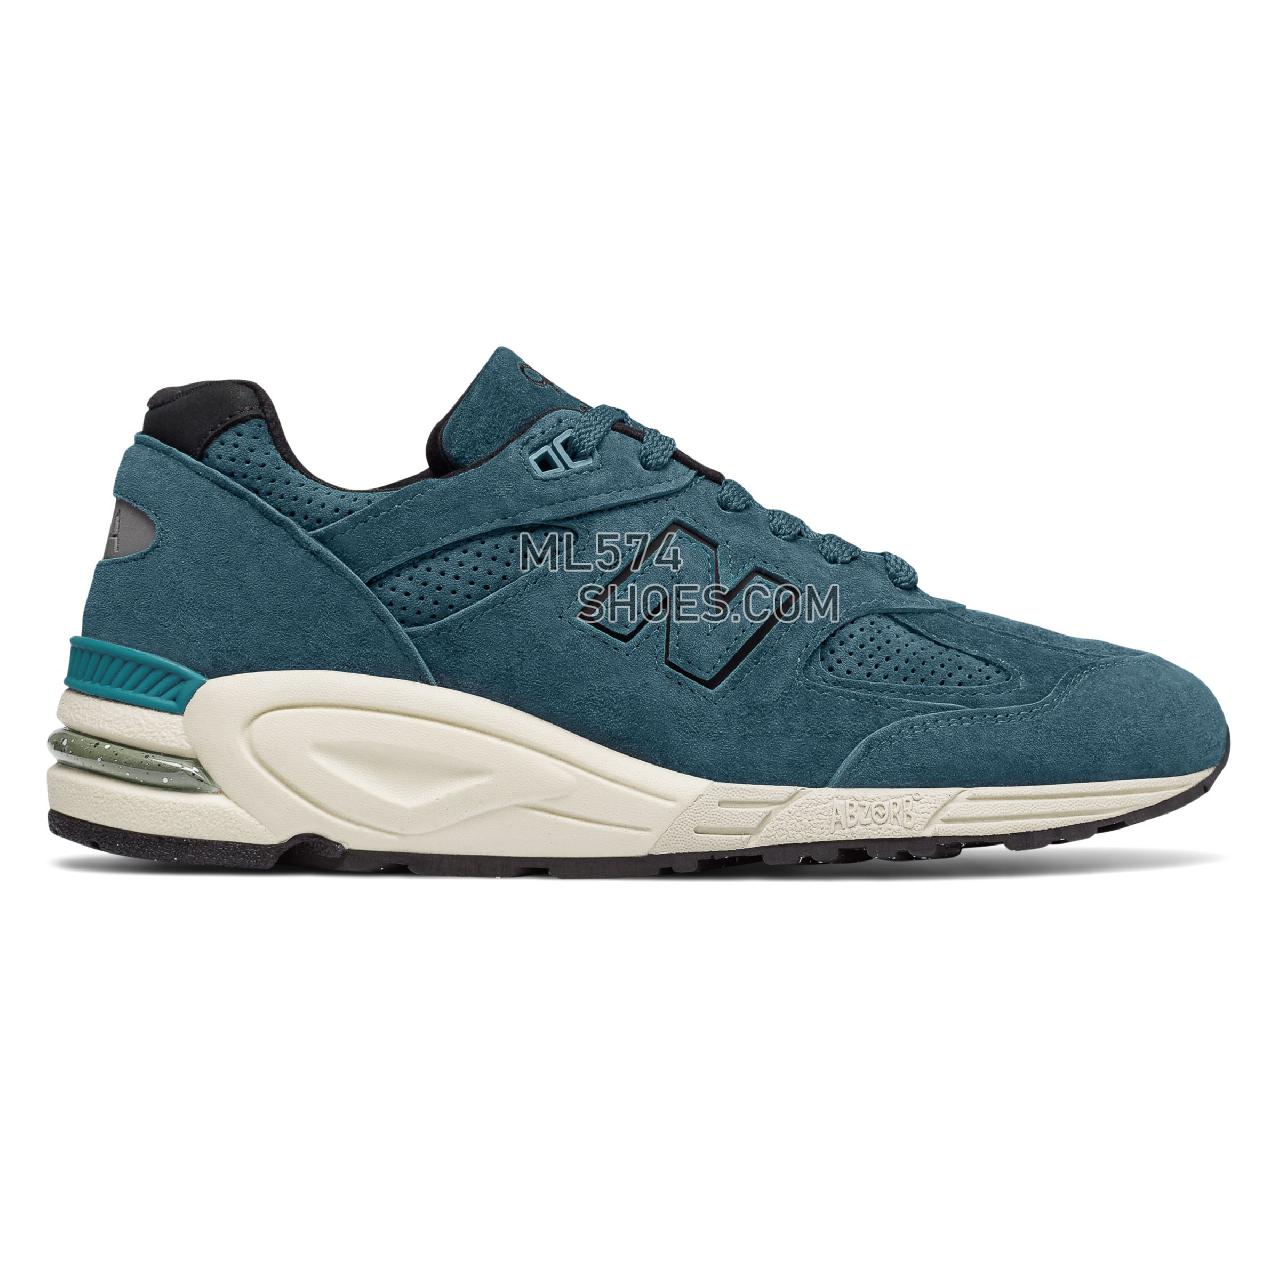 New Balance 990v2 Made in US Color Spectrum - Men's 990 - Classic North Sea with Moonbeam - M990CR2